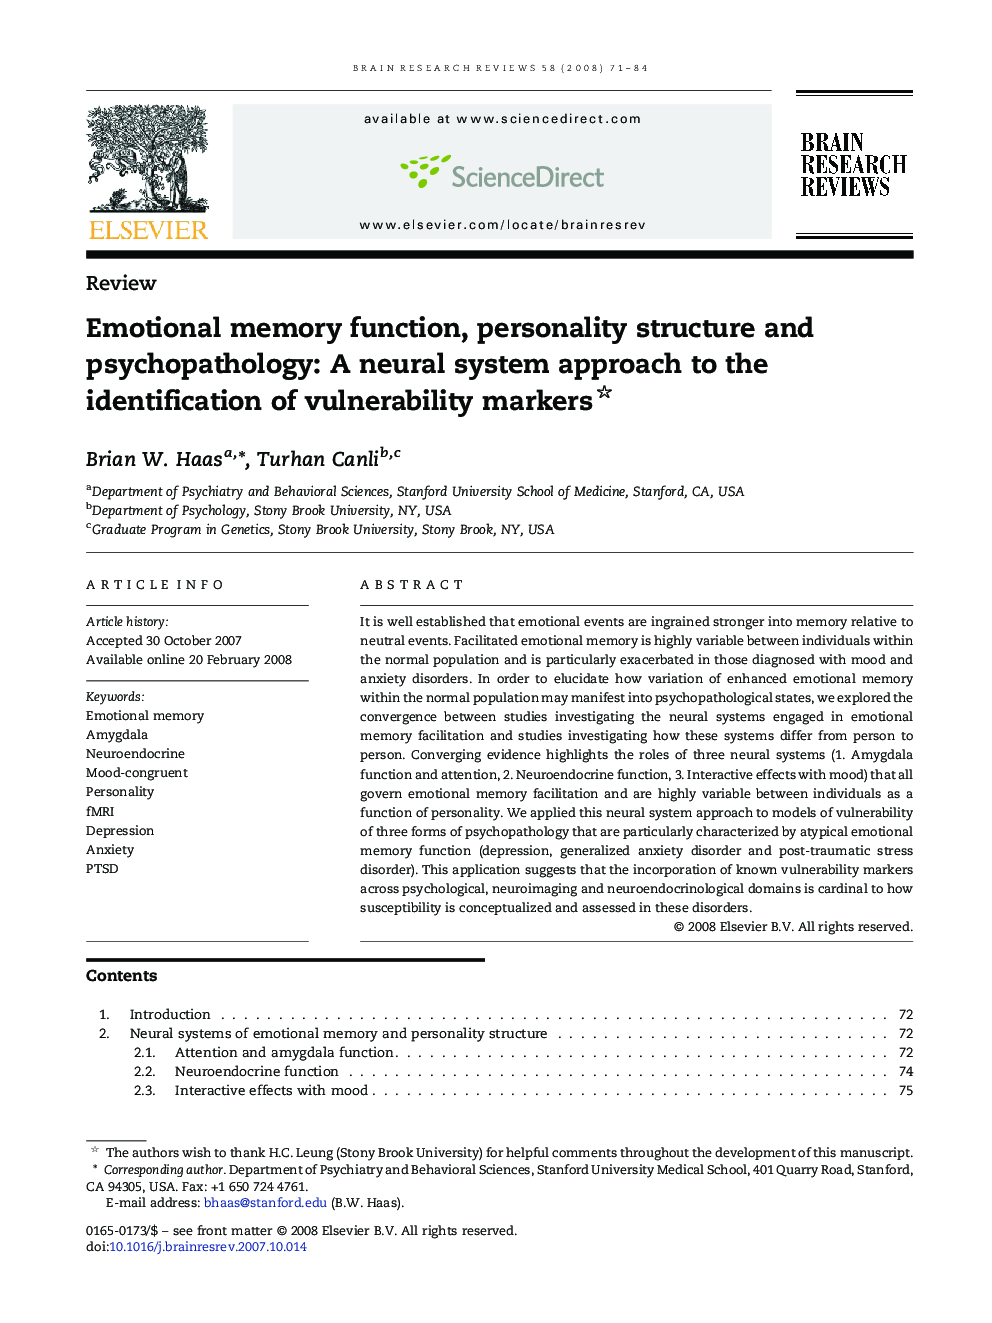 Emotional memory function, personality structure and psychopathology: A neural system approach to the identification of vulnerability markers 